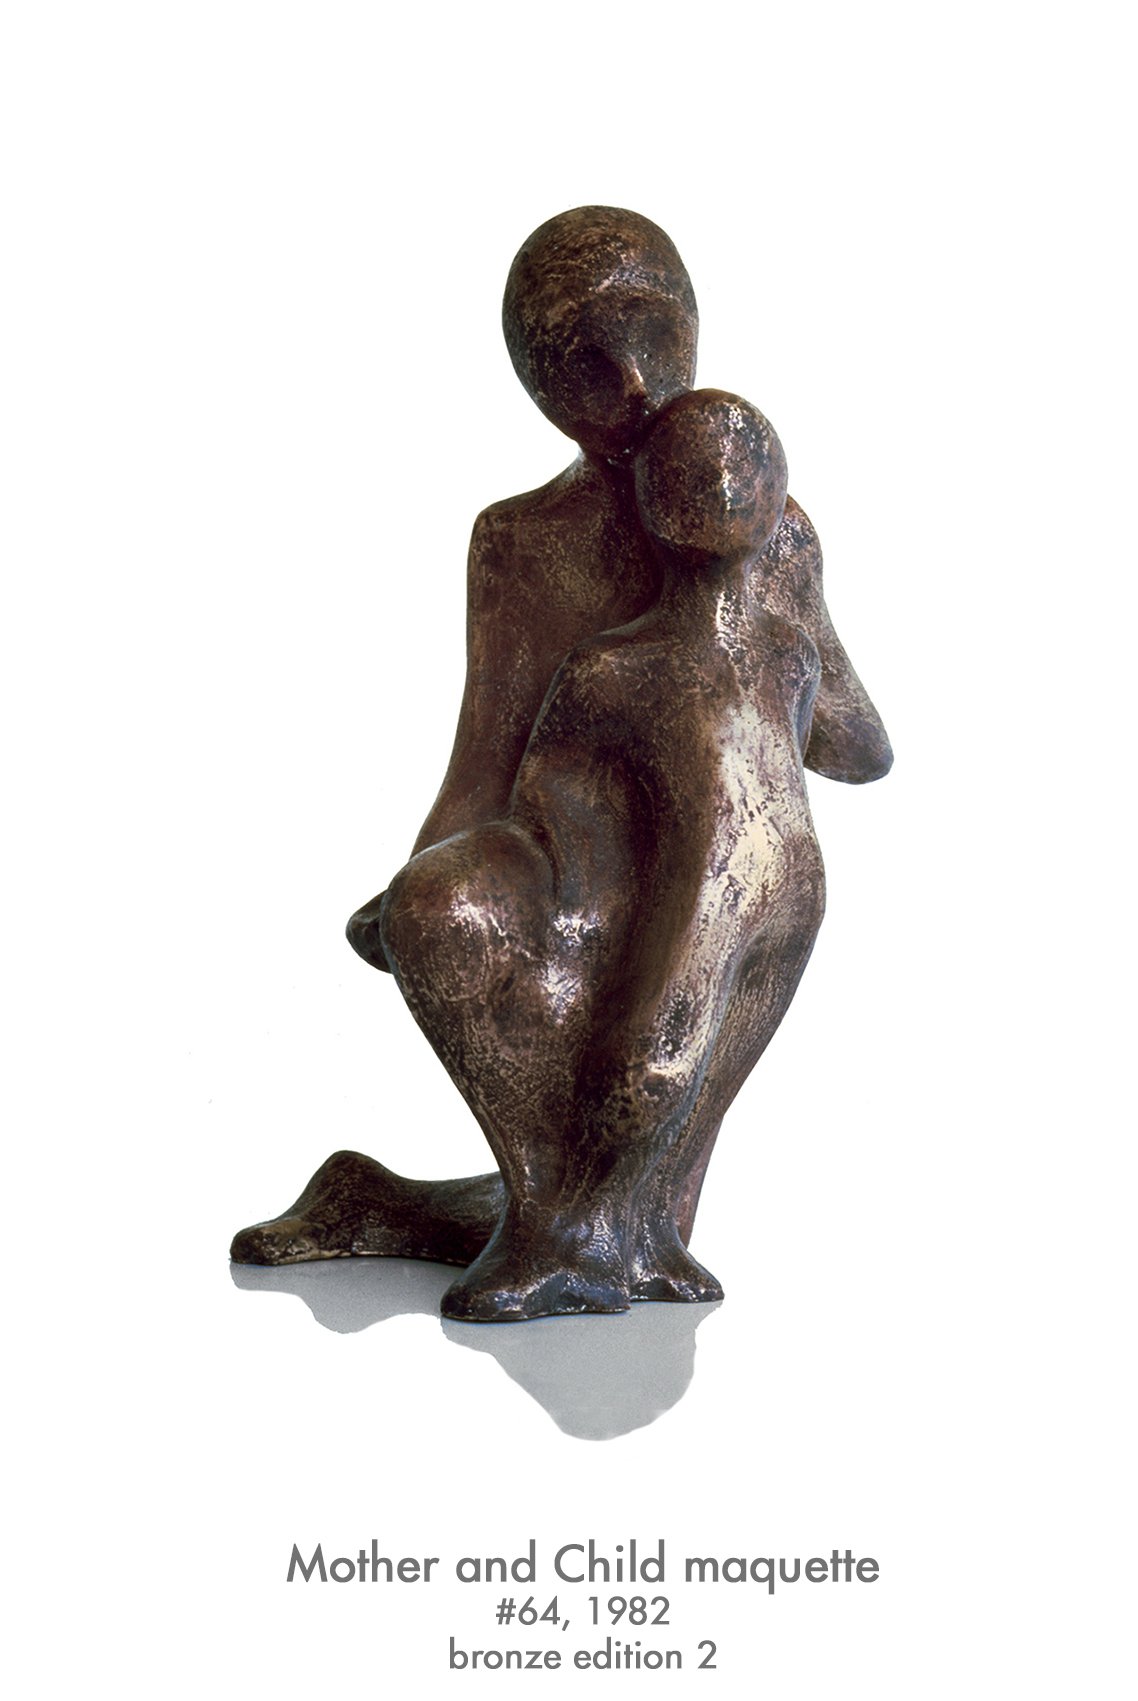 Mother and Child, 1982, bronze edition 2, #64